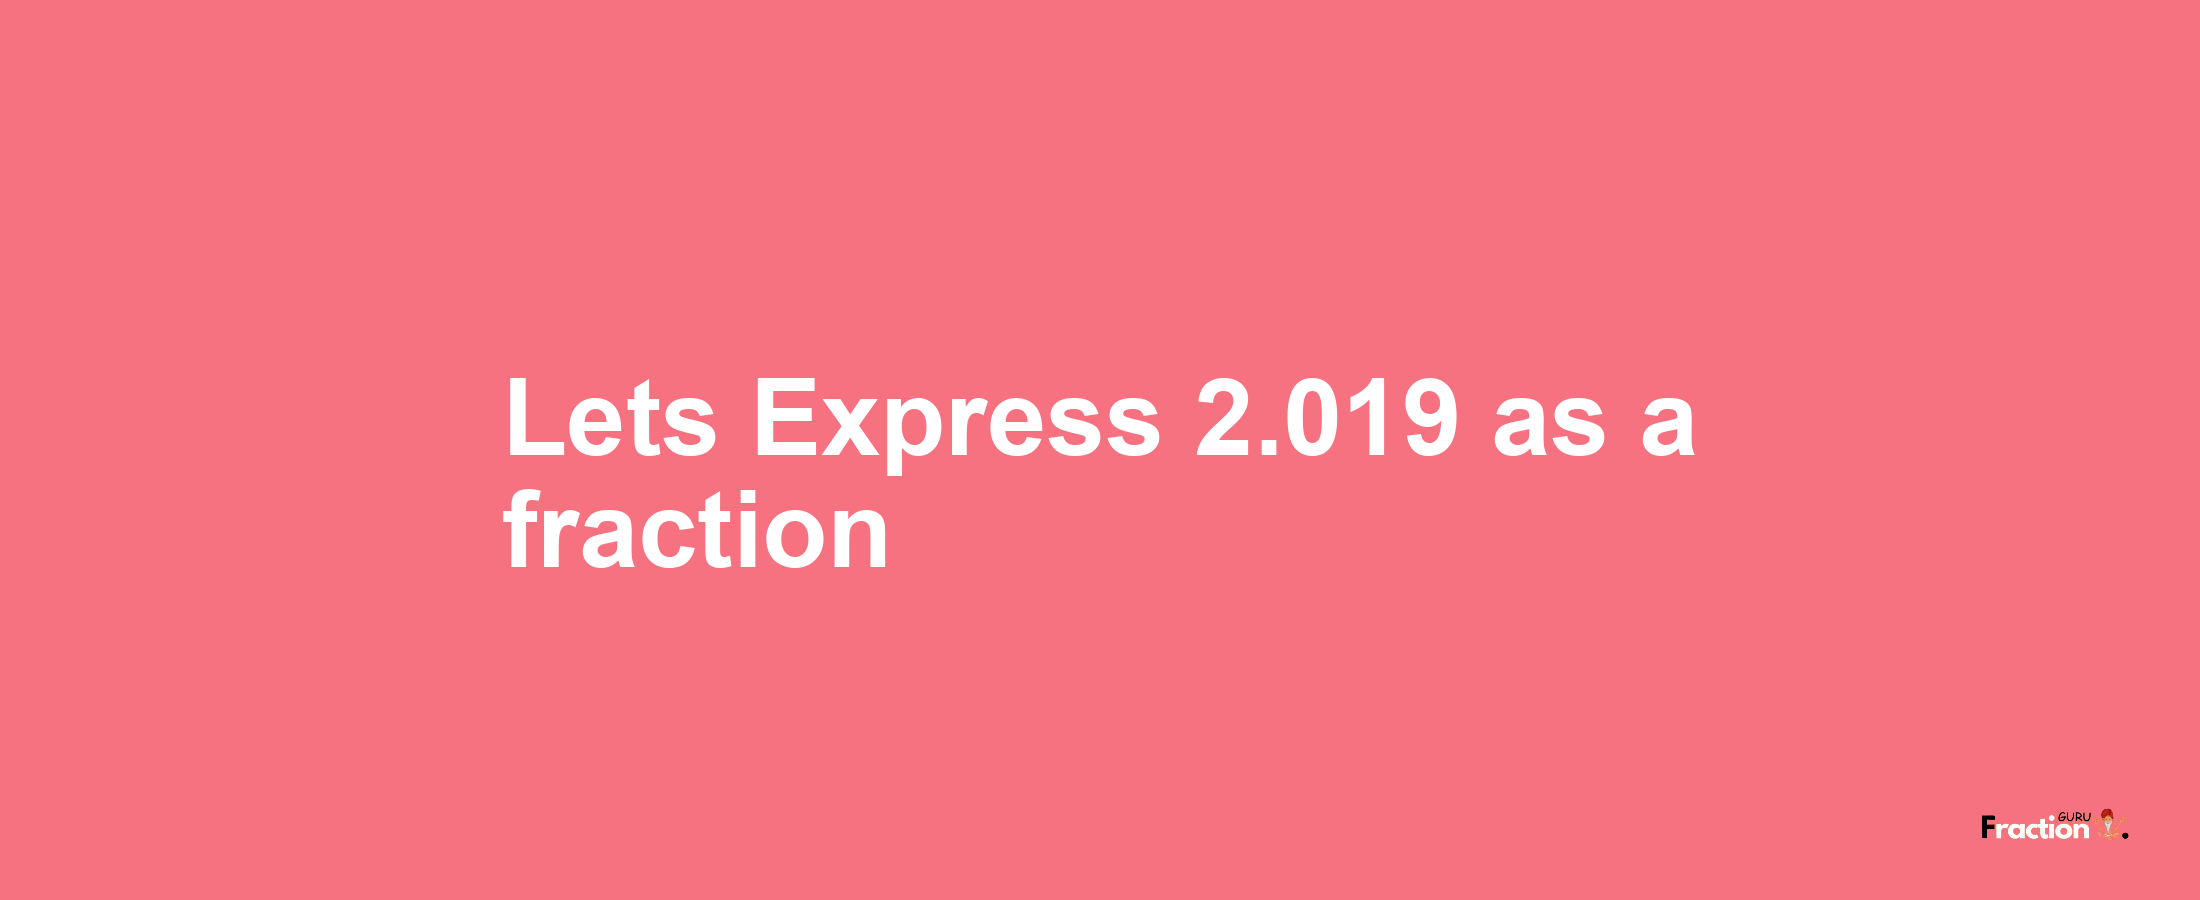 Lets Express 2.019 as afraction